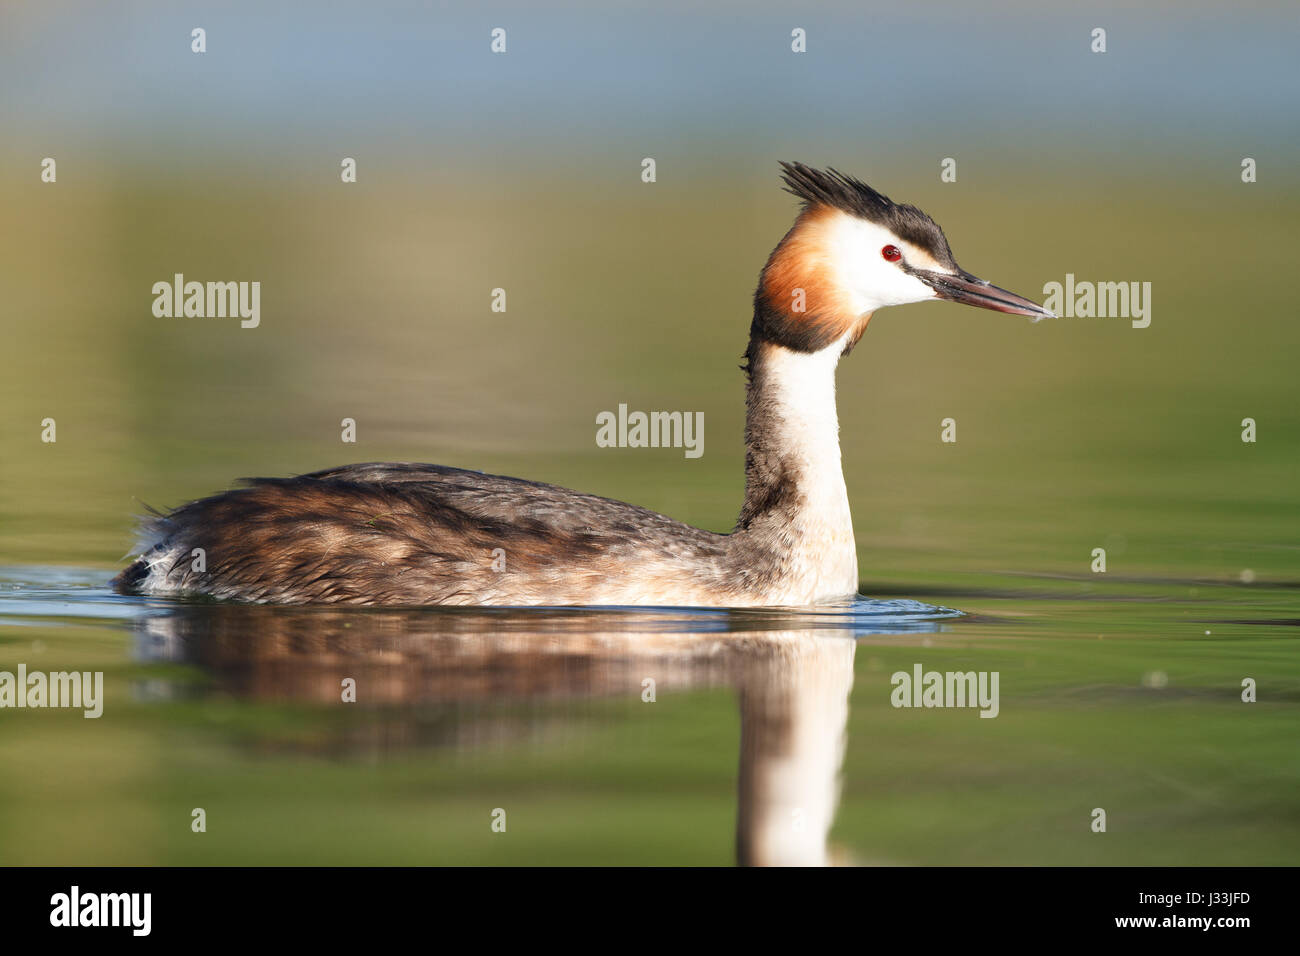 Great crested grebe (Podiceps cristatus) in the lake, Baden-Württemberg, Germany Stock Photo